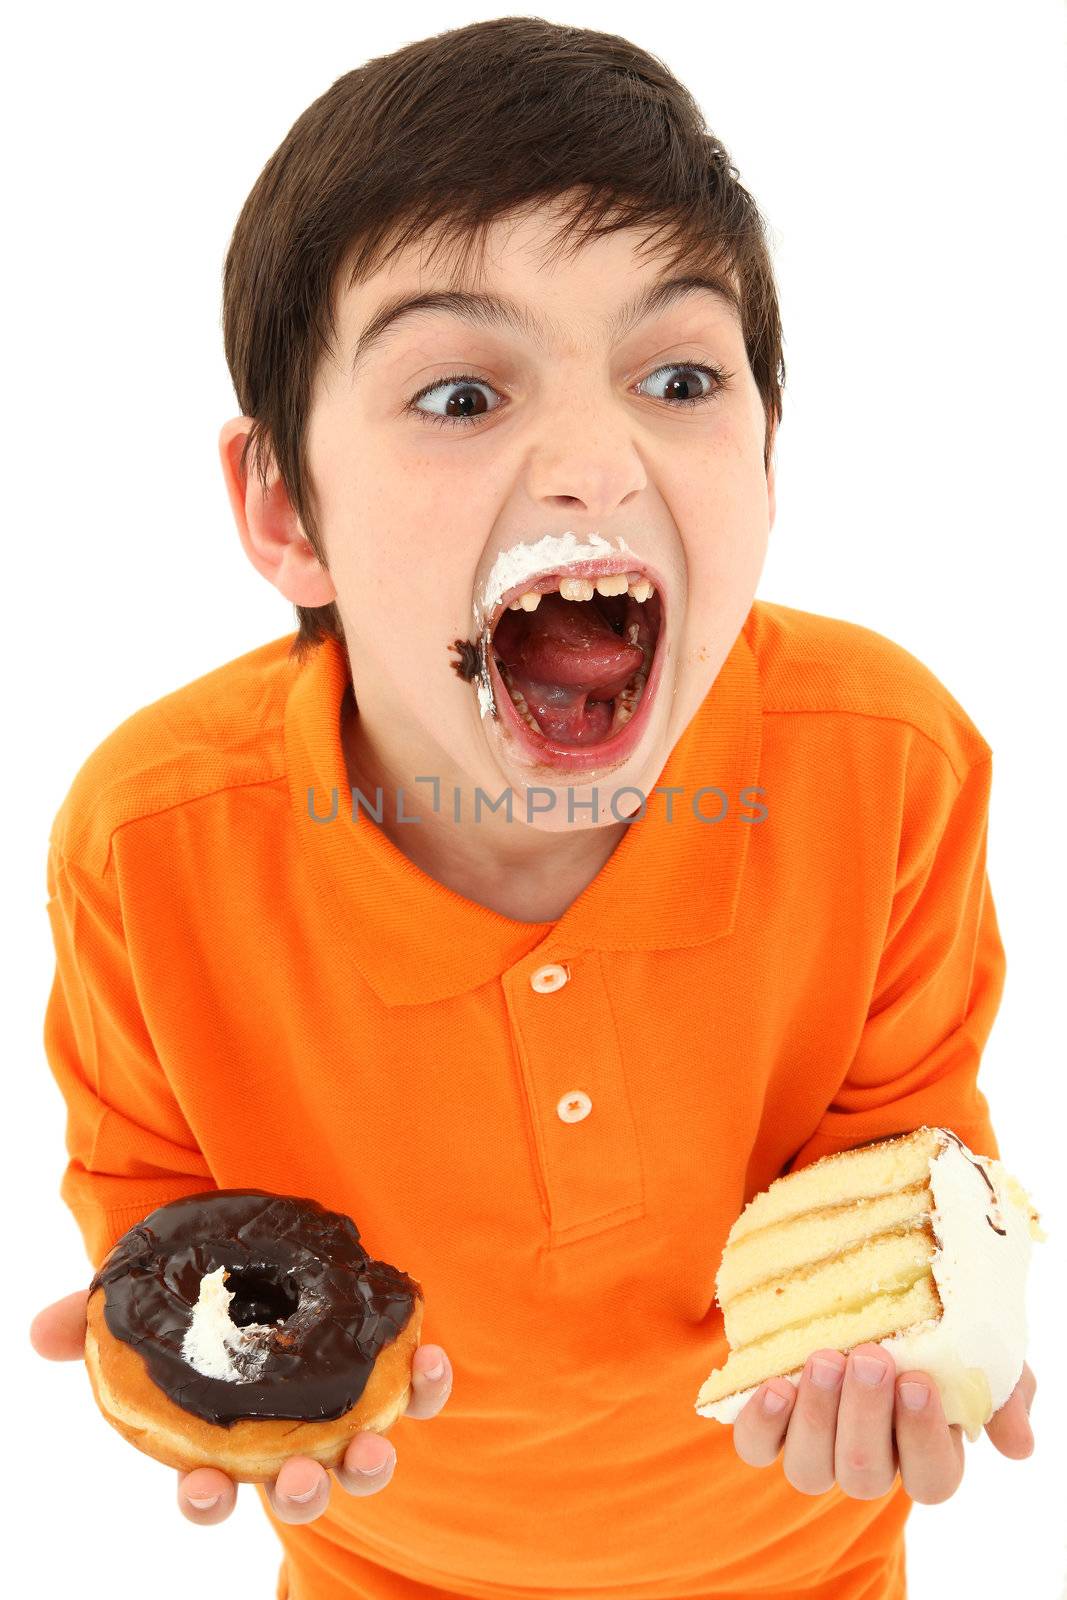 Attractive 8 year old boy with insane expression and hands full of sweets over white.